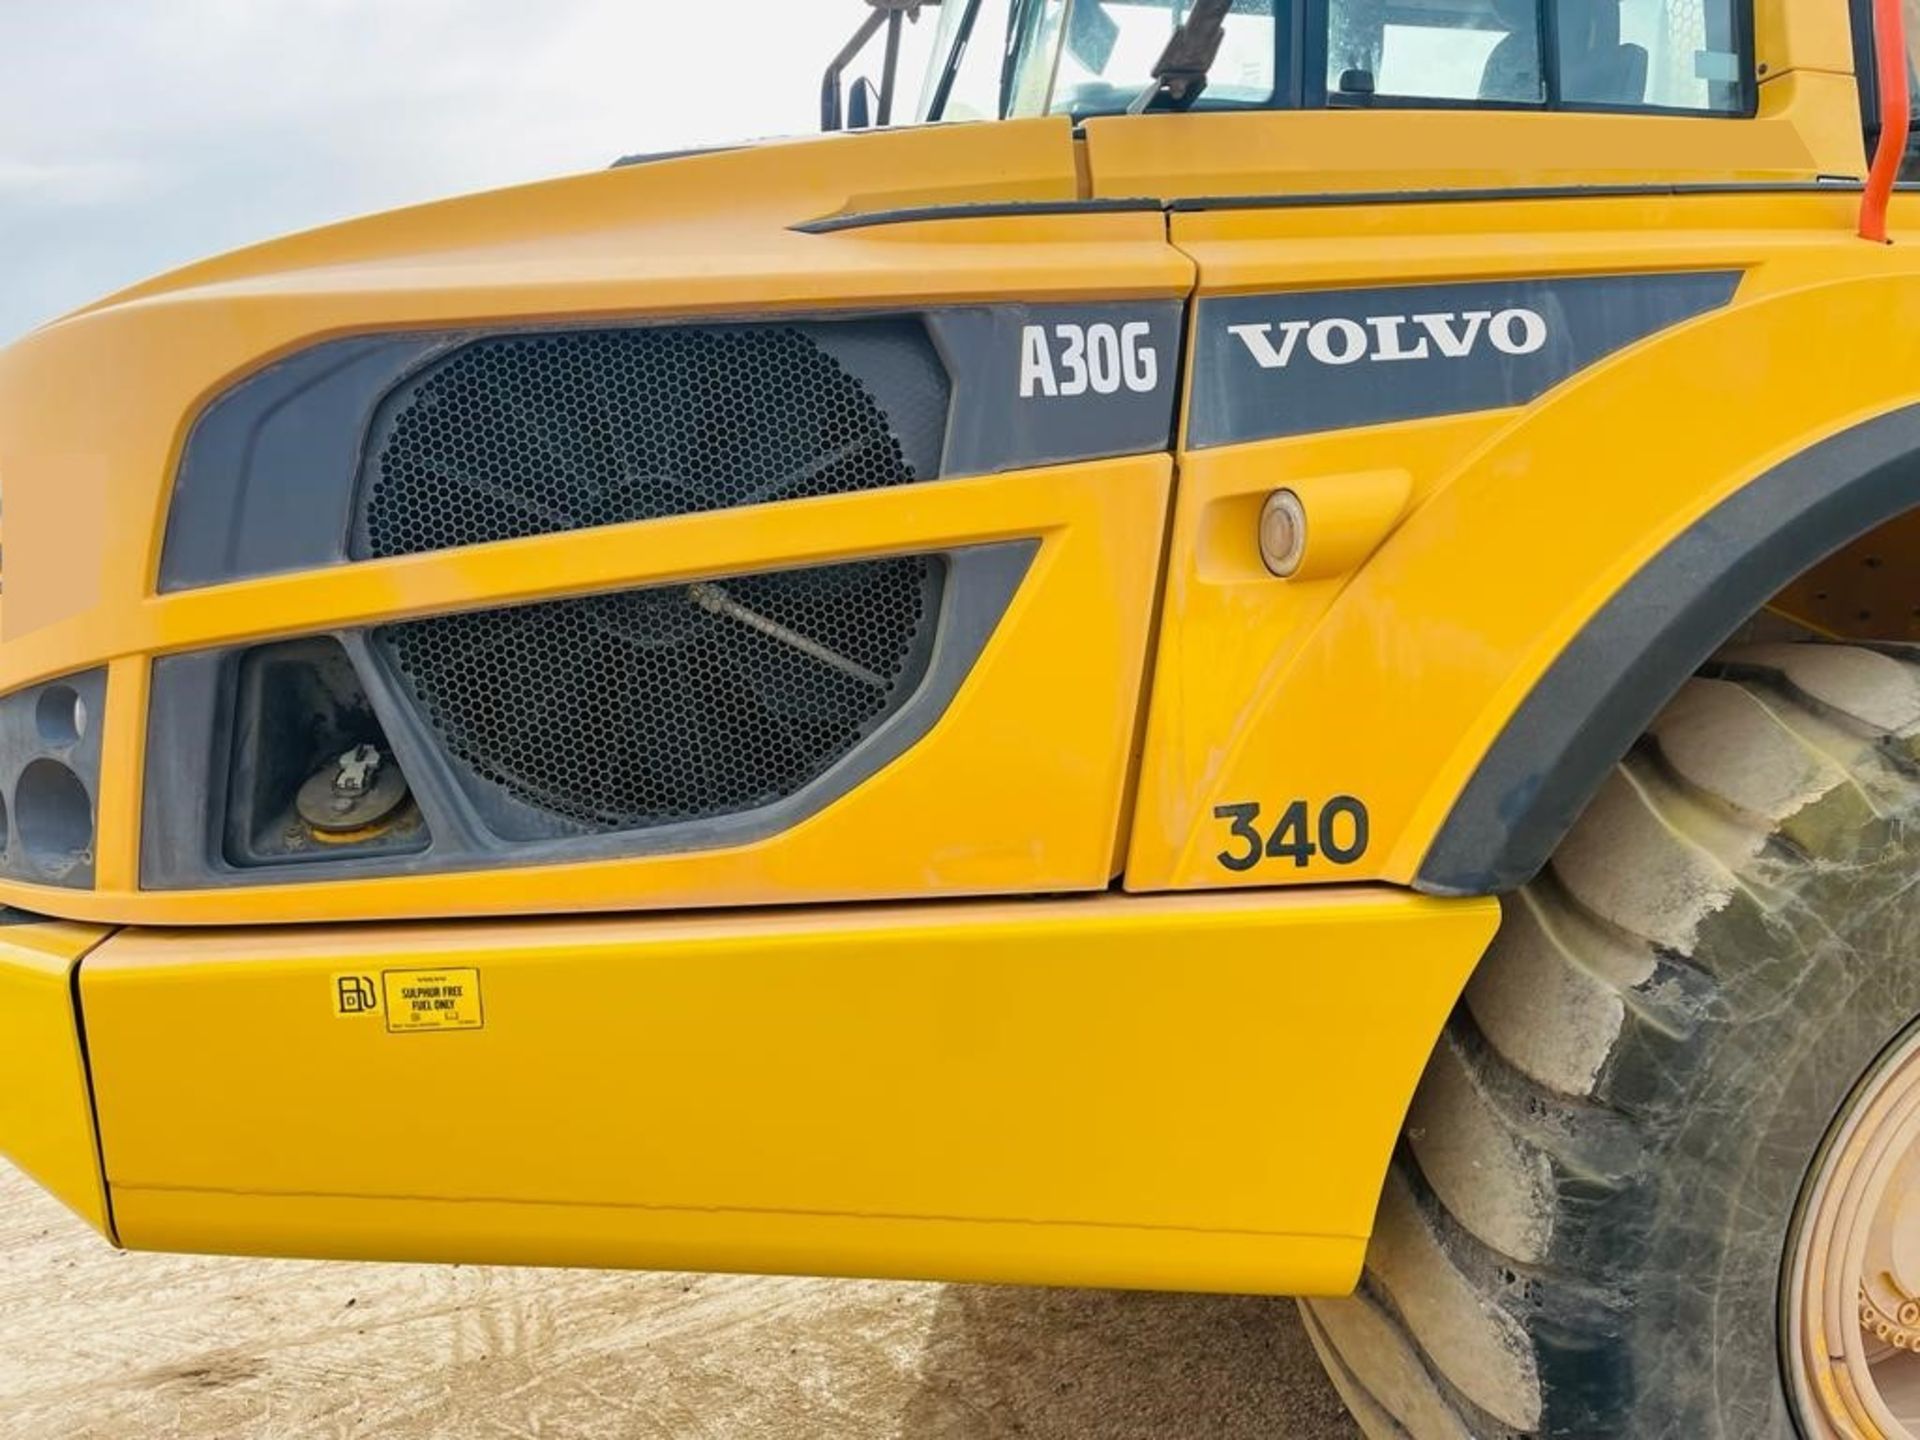 2021 - VOLVO A 30 G DUMP TRUCK - Image 10 of 20